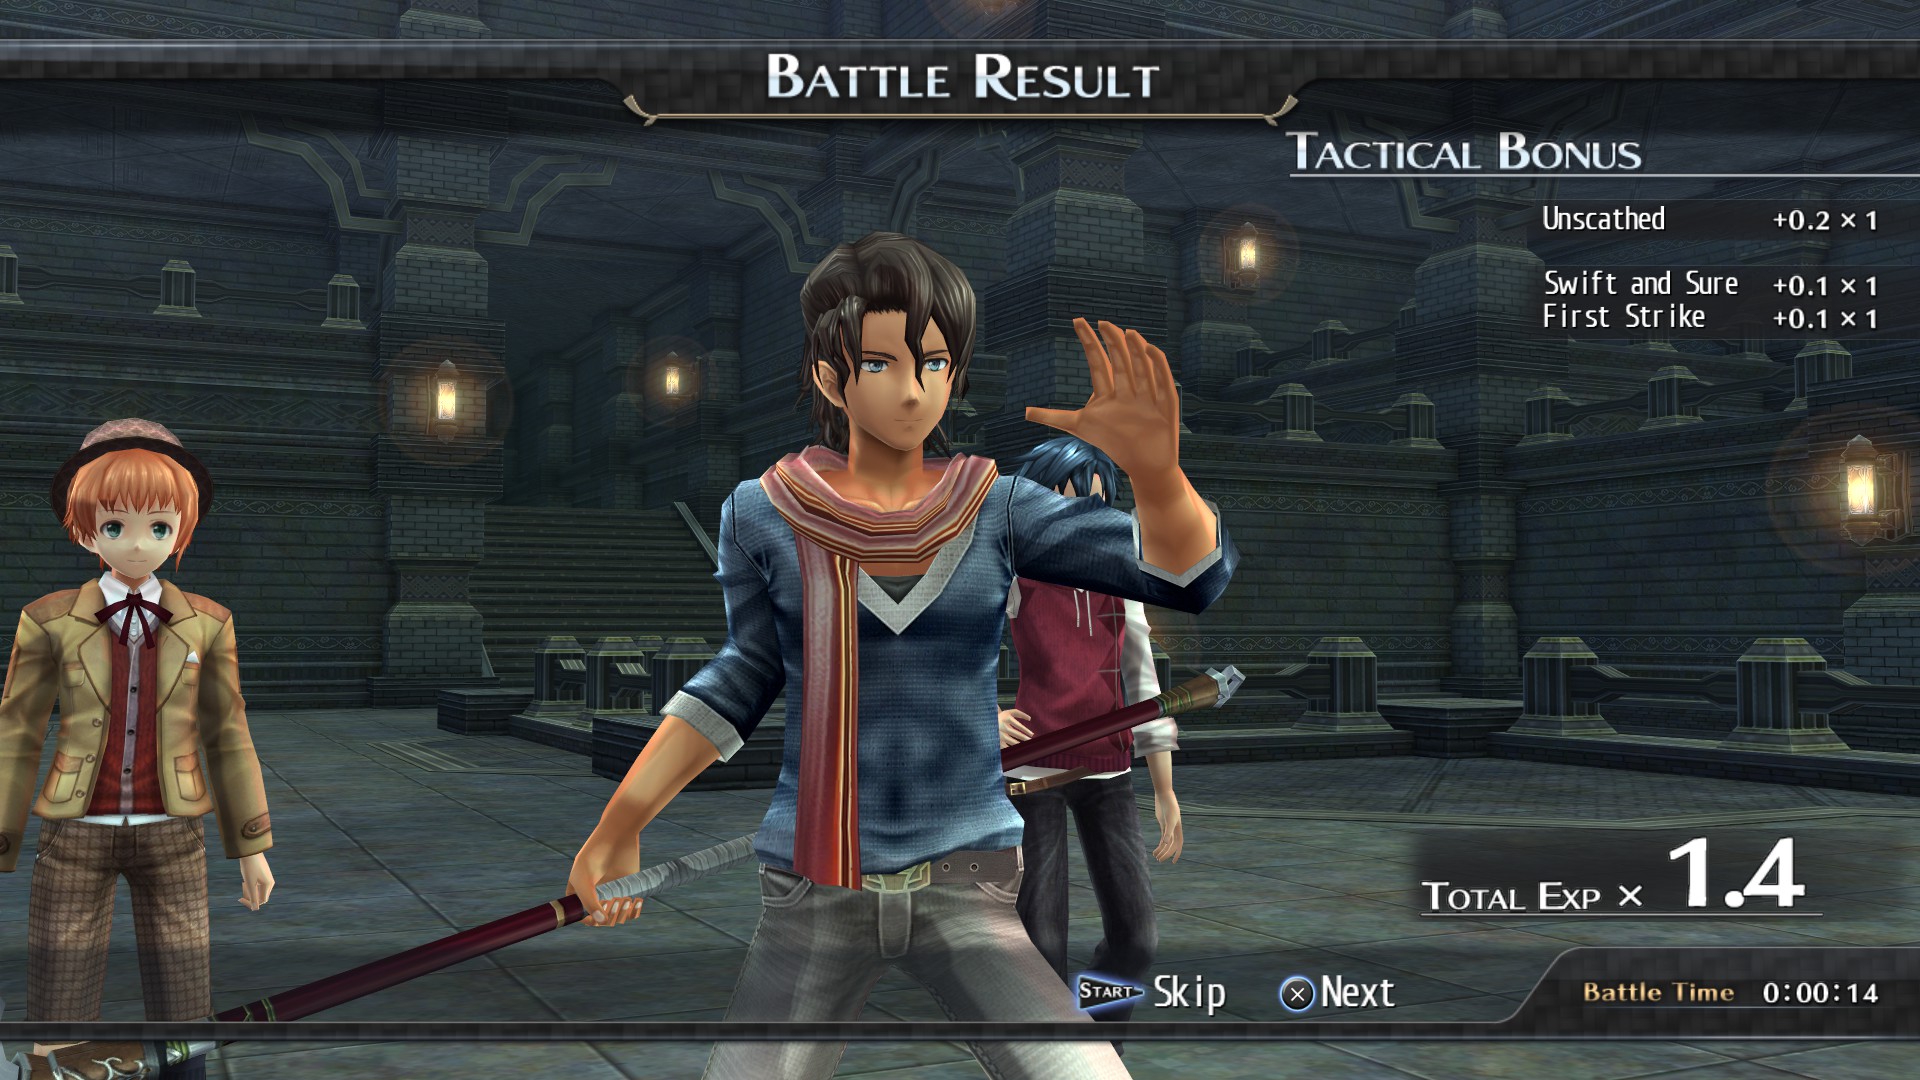 The Legend of Heroes: Trails of Cold Steel - Gaius' Casuals Featured Screenshot #1